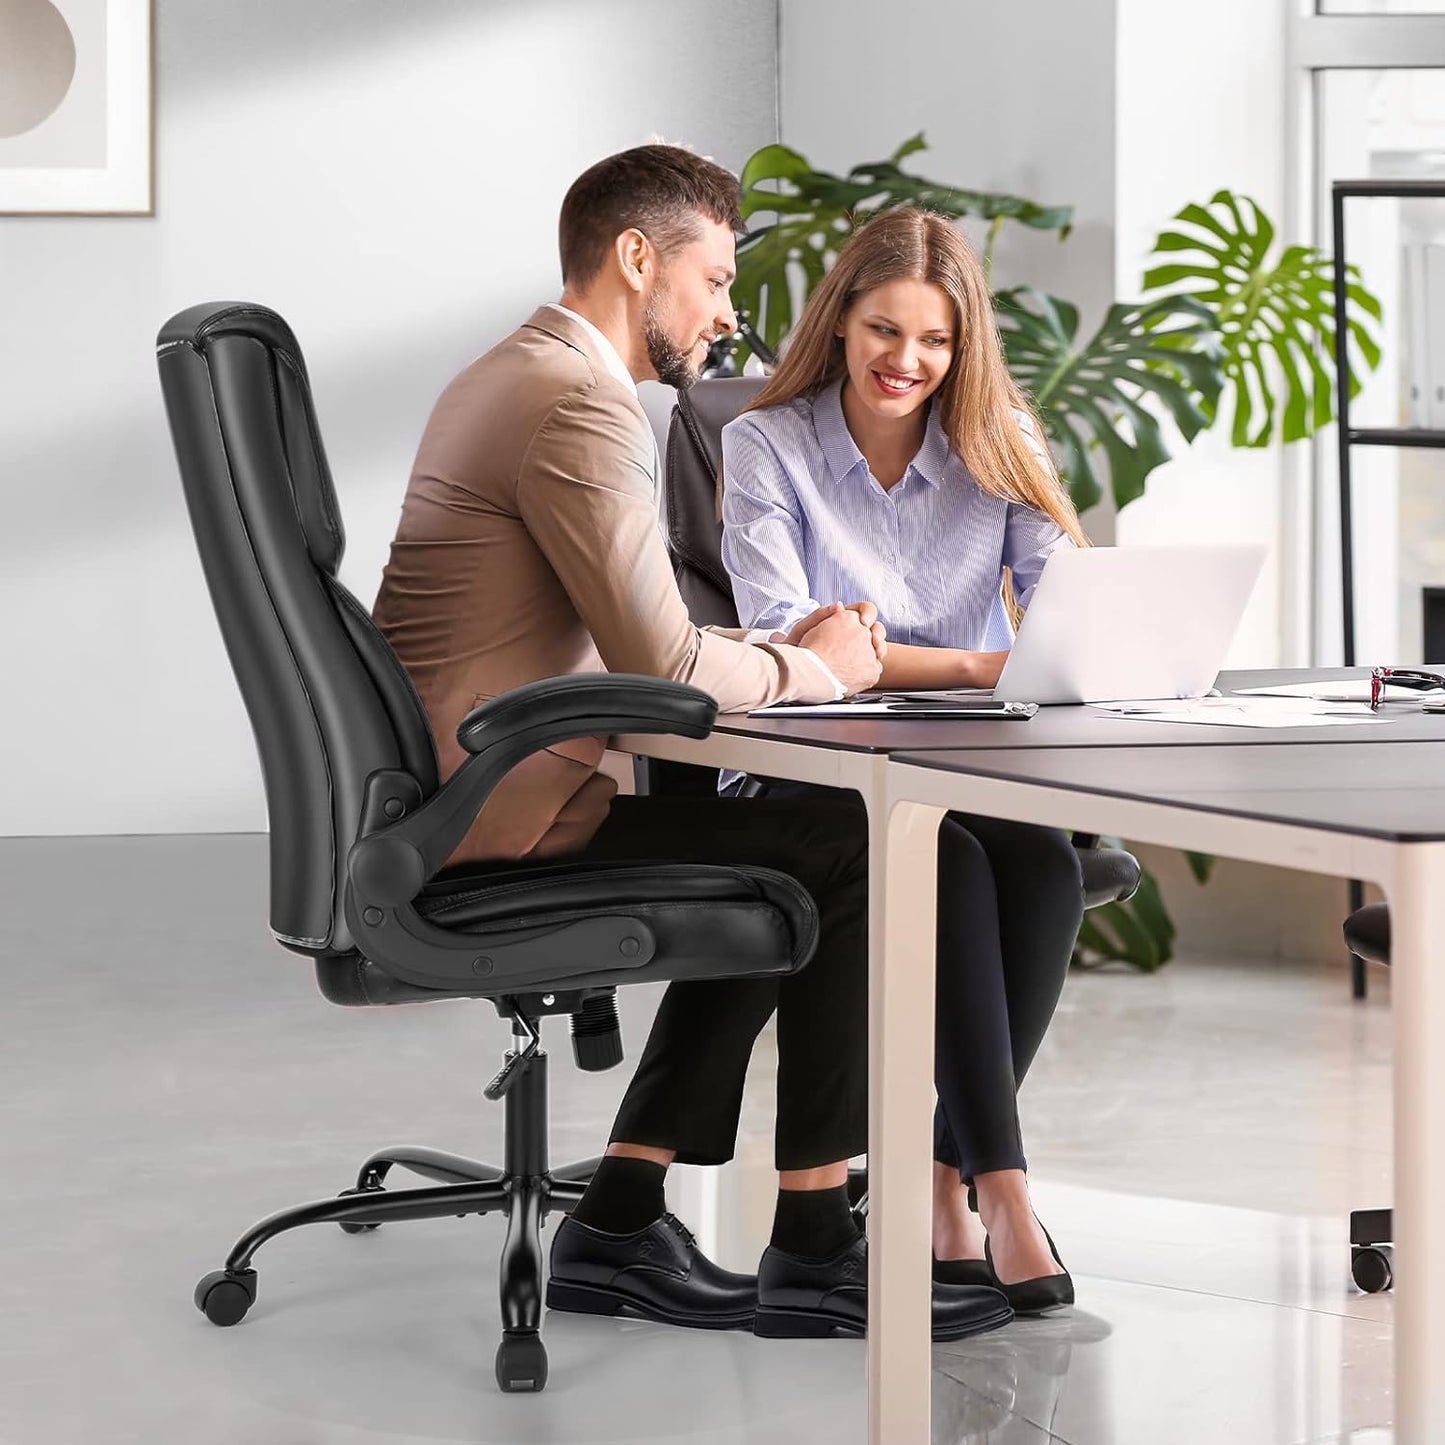 Executive Office Chair – Ergonomic Adjustable Computer Desk Chairs with High Back Flip-up Armrests, Swivel Task Chair with Lumbar Support, Bond.Black